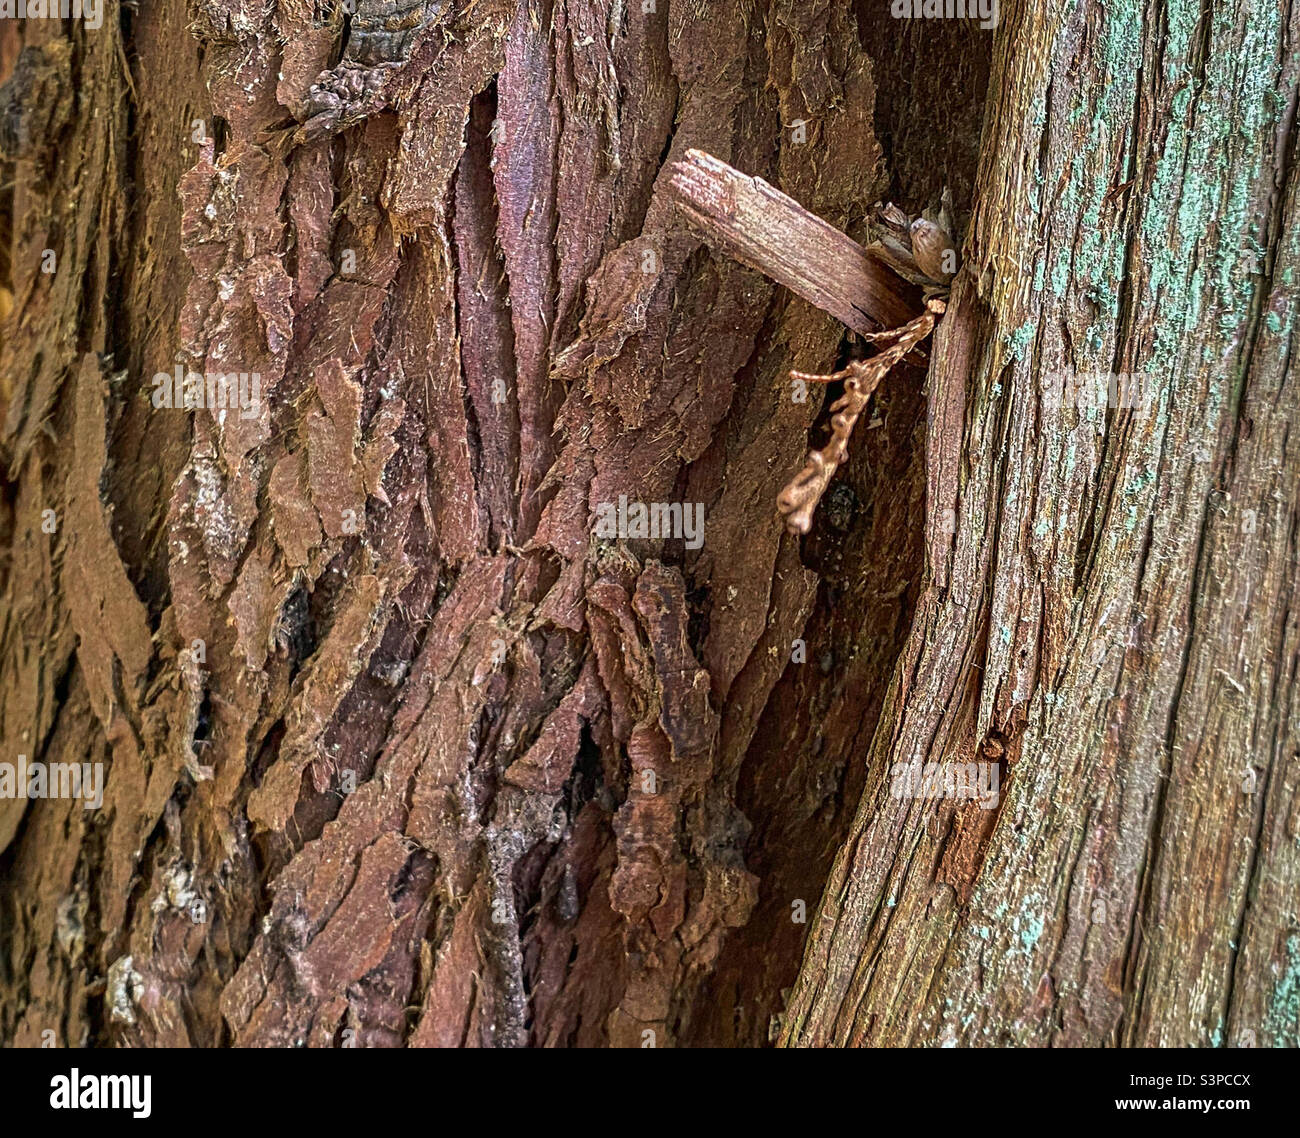 Semi-abstract closeup of the textured bark of two Western redcedar trees (Thuga plicata) in a forest in coastal British Columbia. Stock Photo